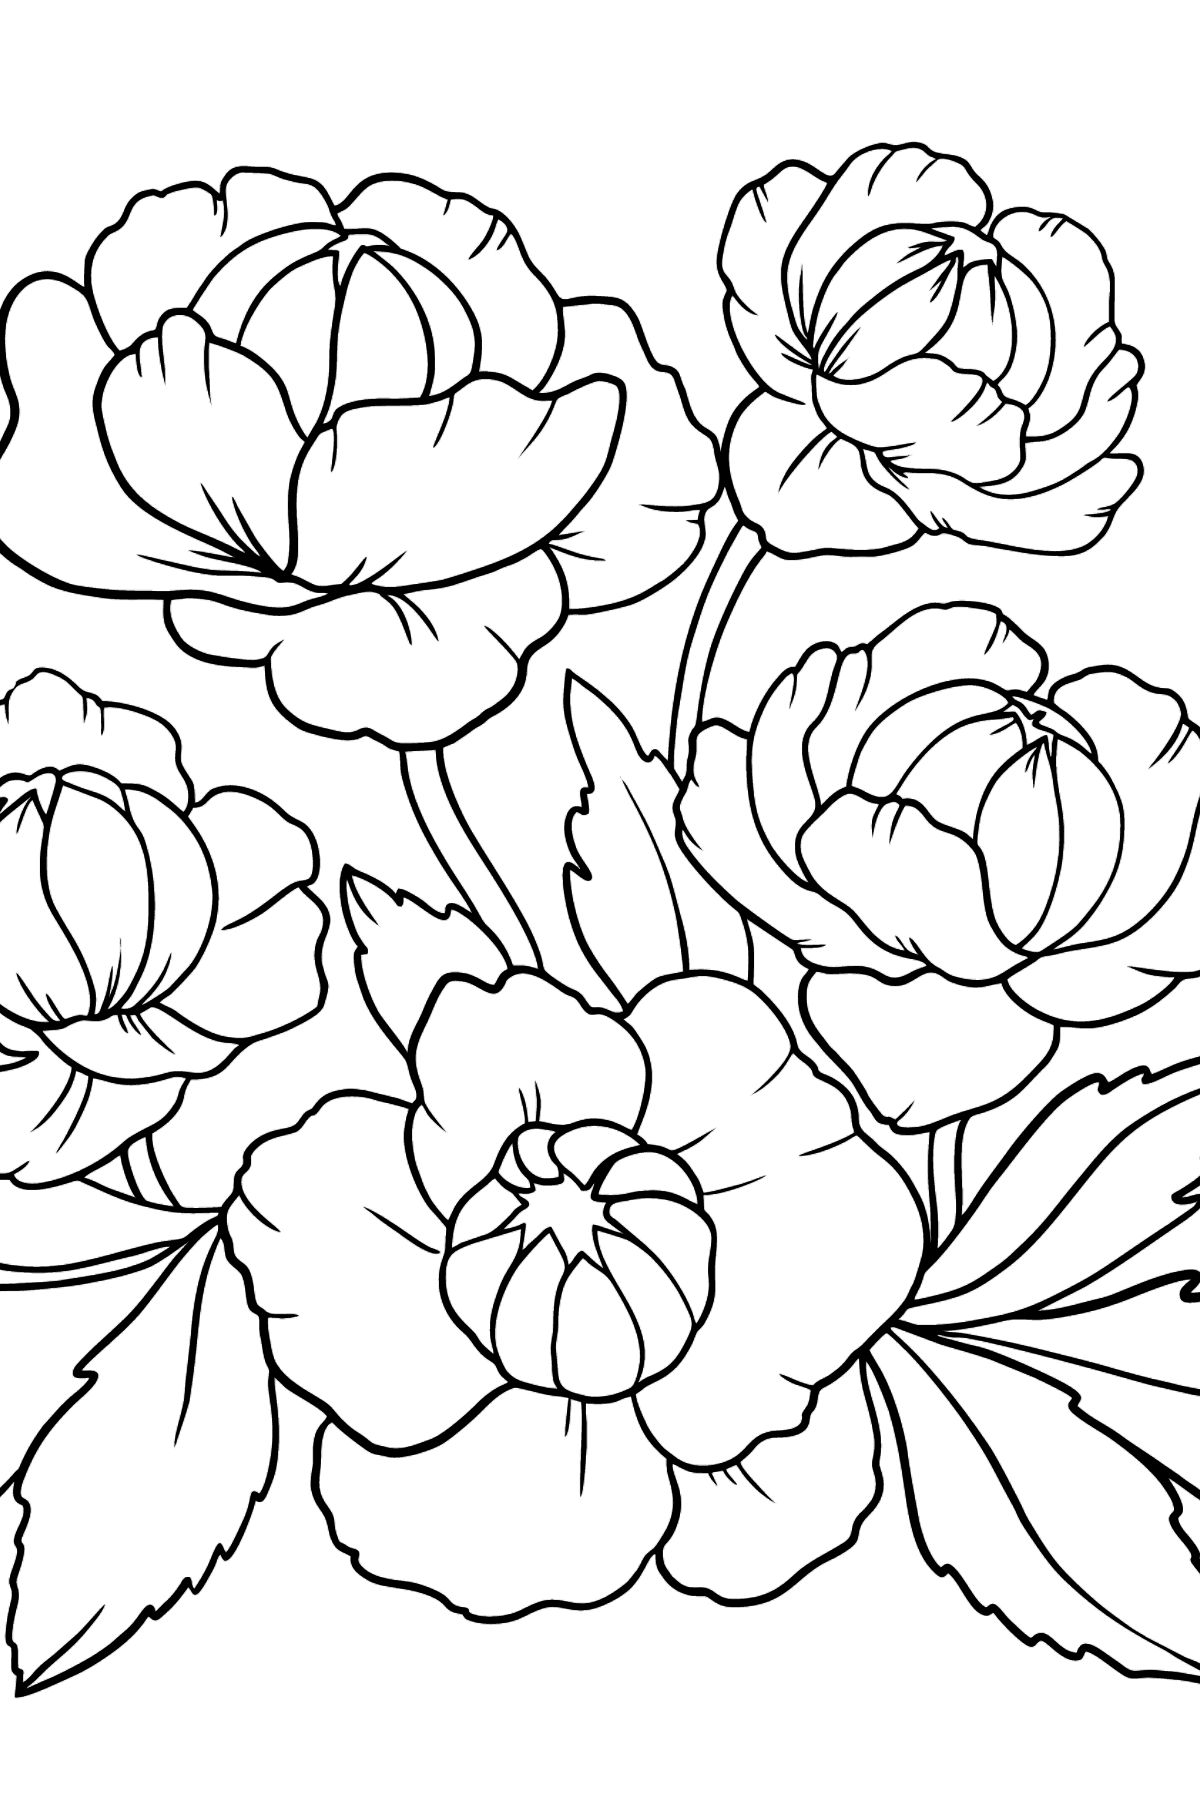 Flower Coloring Page - A Pink Globeflower - Coloring Pages for Kids